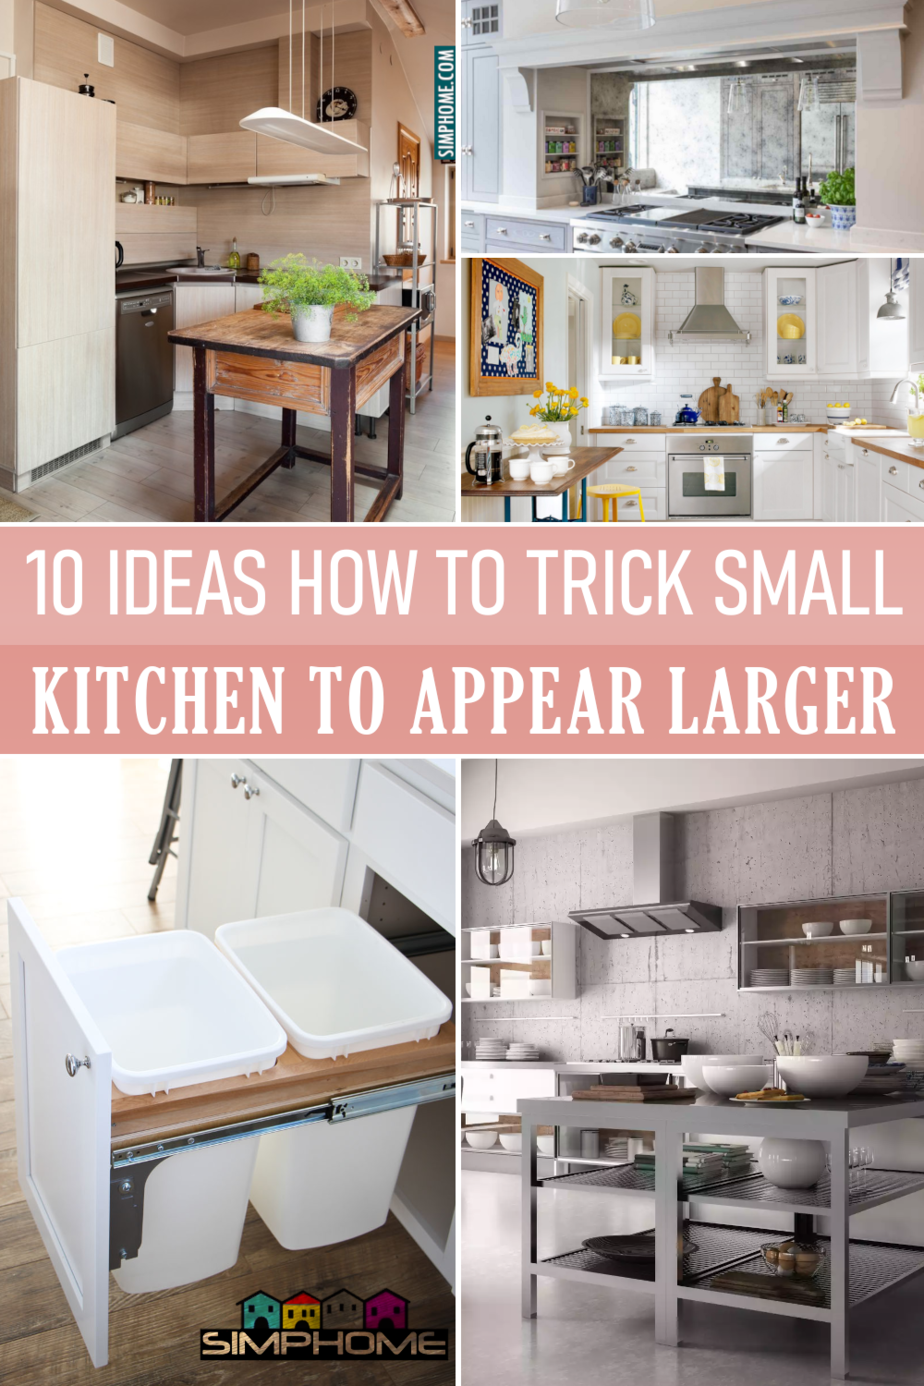 10 Tips How to turn Small Kitchen Looks Larger via Simphome.comFeatured Image